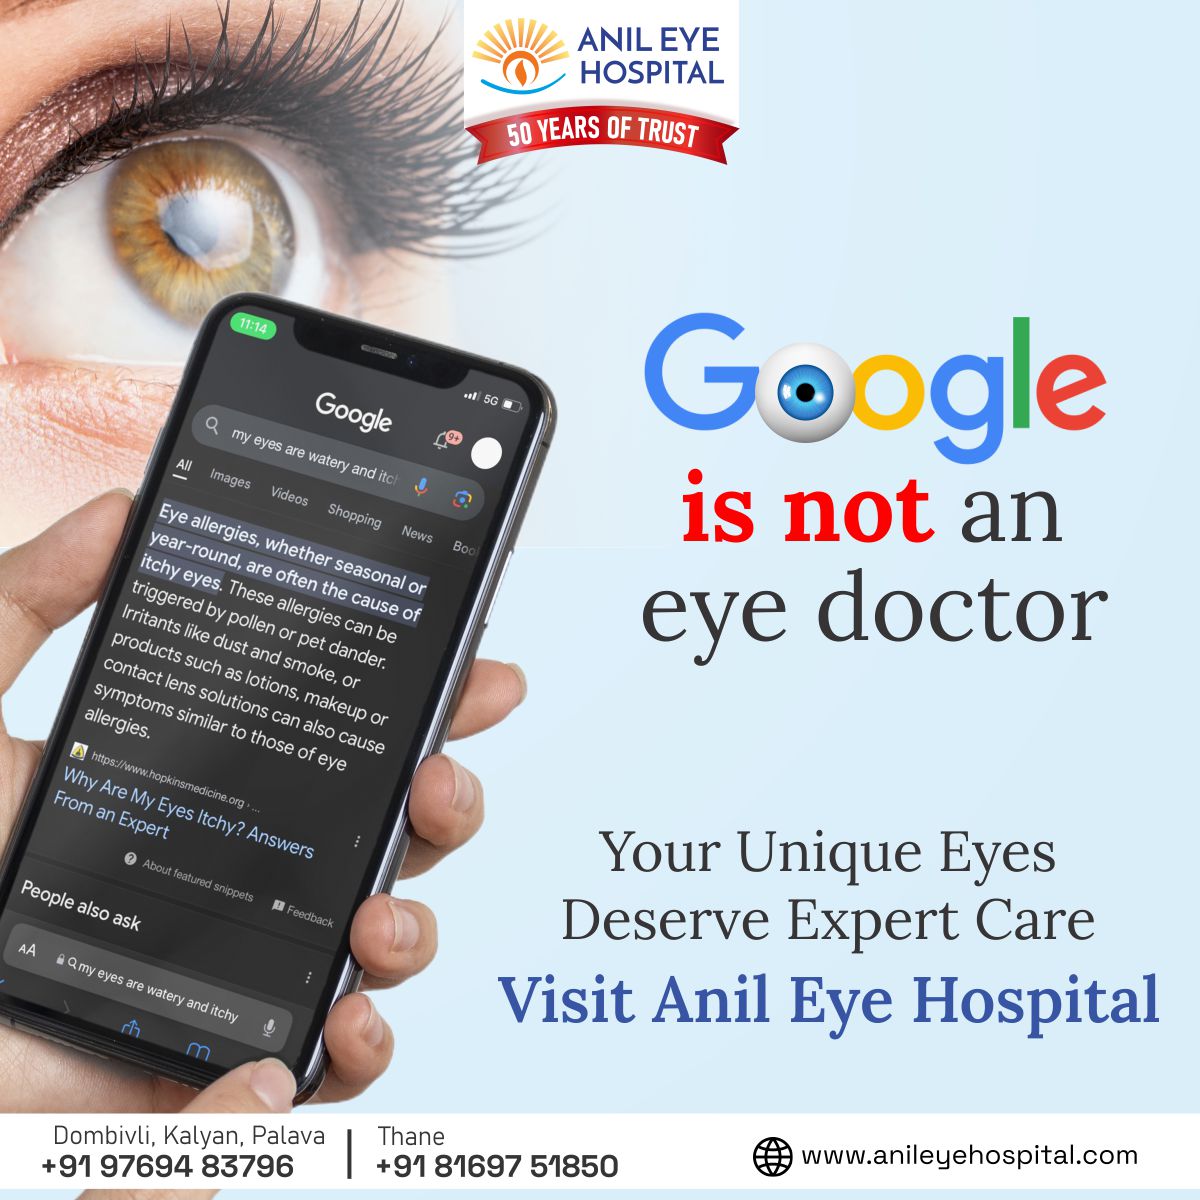 Relying on Google for eye care?

Remember, it's no substitute for professional expertise.
Trust trained optometrists for accurate diagnoses and personalized treatment.

Your eyes deserve the best care!

Book your appointment Now!